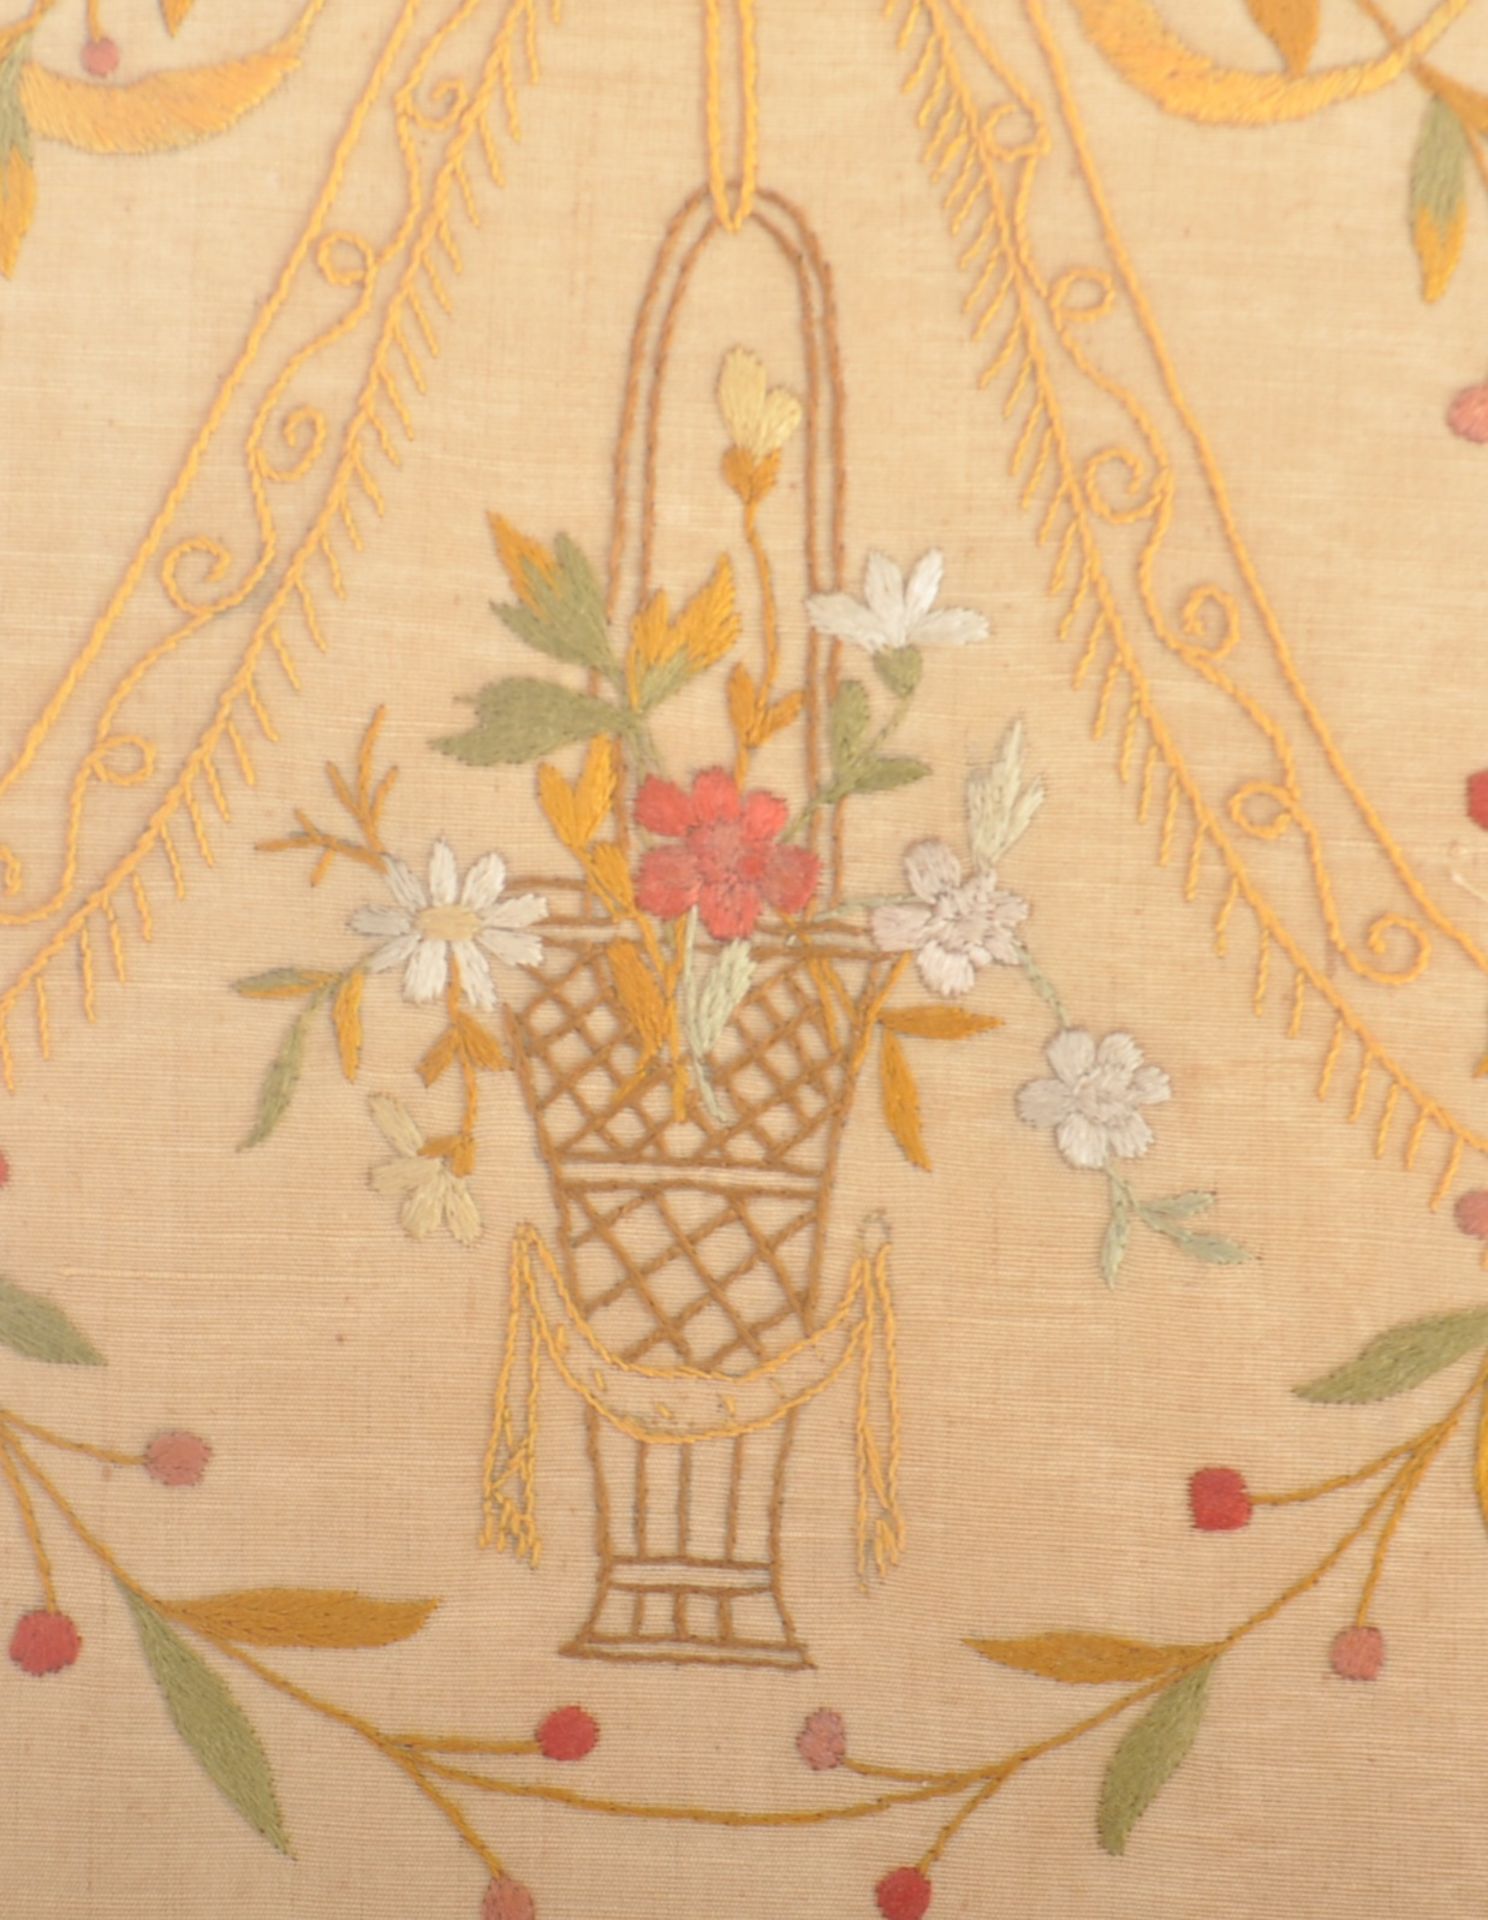 19TH CENTURY VICTORIAN NEEDLEWORK FLORAL PANEL - Image 2 of 4